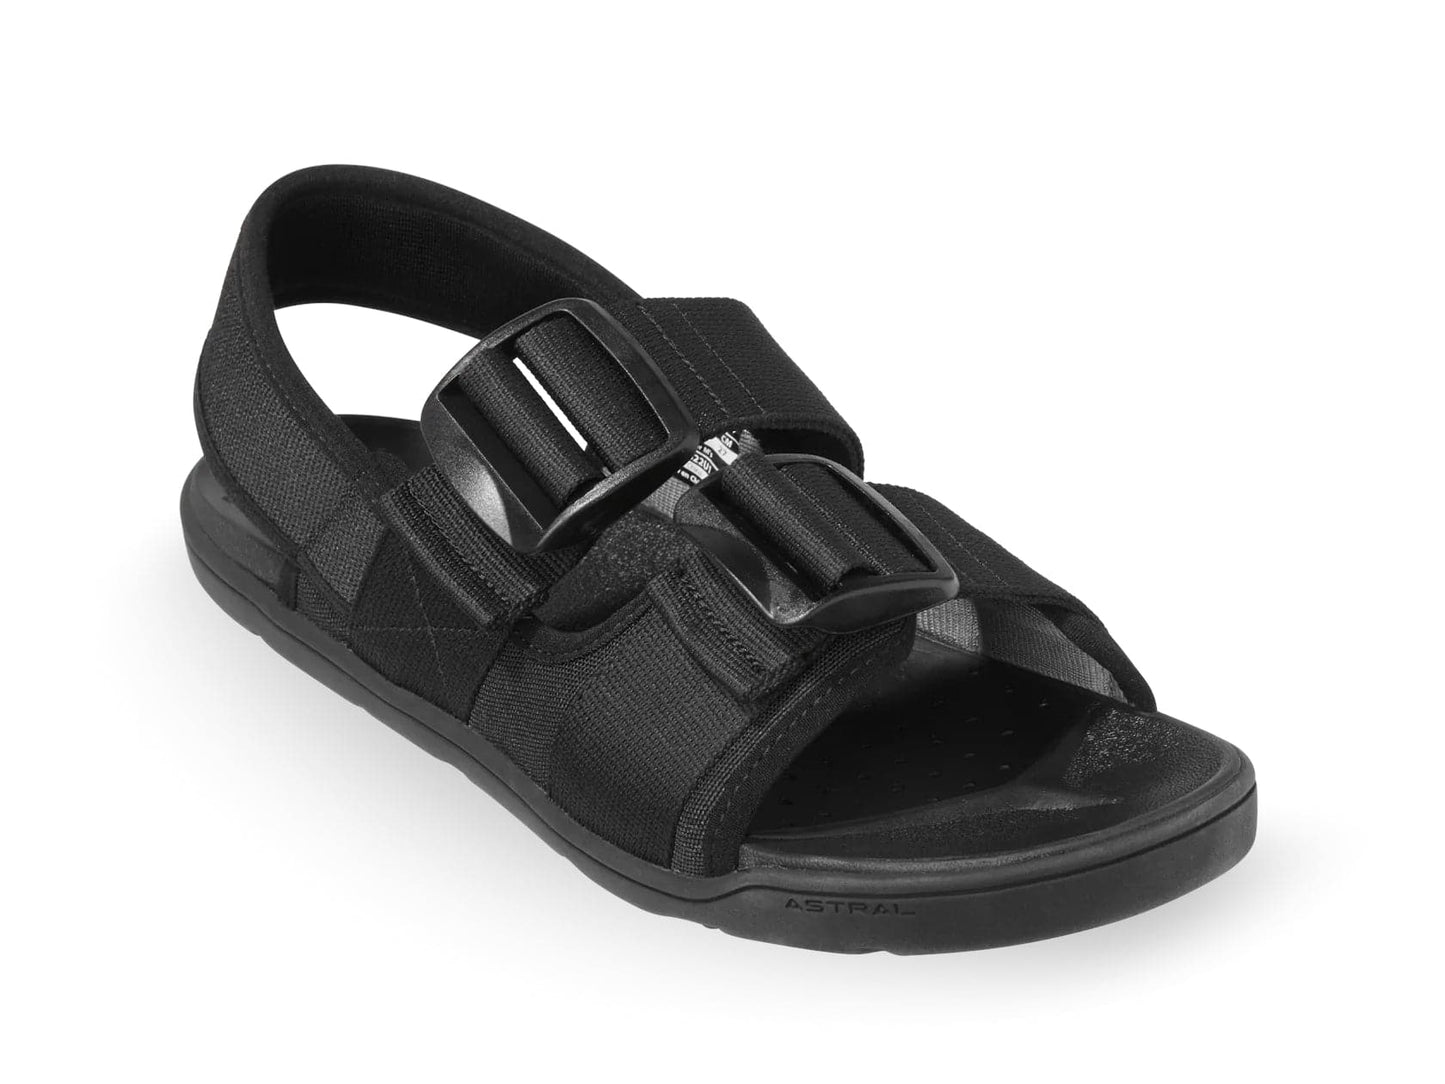 Featuring the Webber Sandal - Men's men's footwear, sandals, water shoe manufactured by Astral shown here from a second angle.